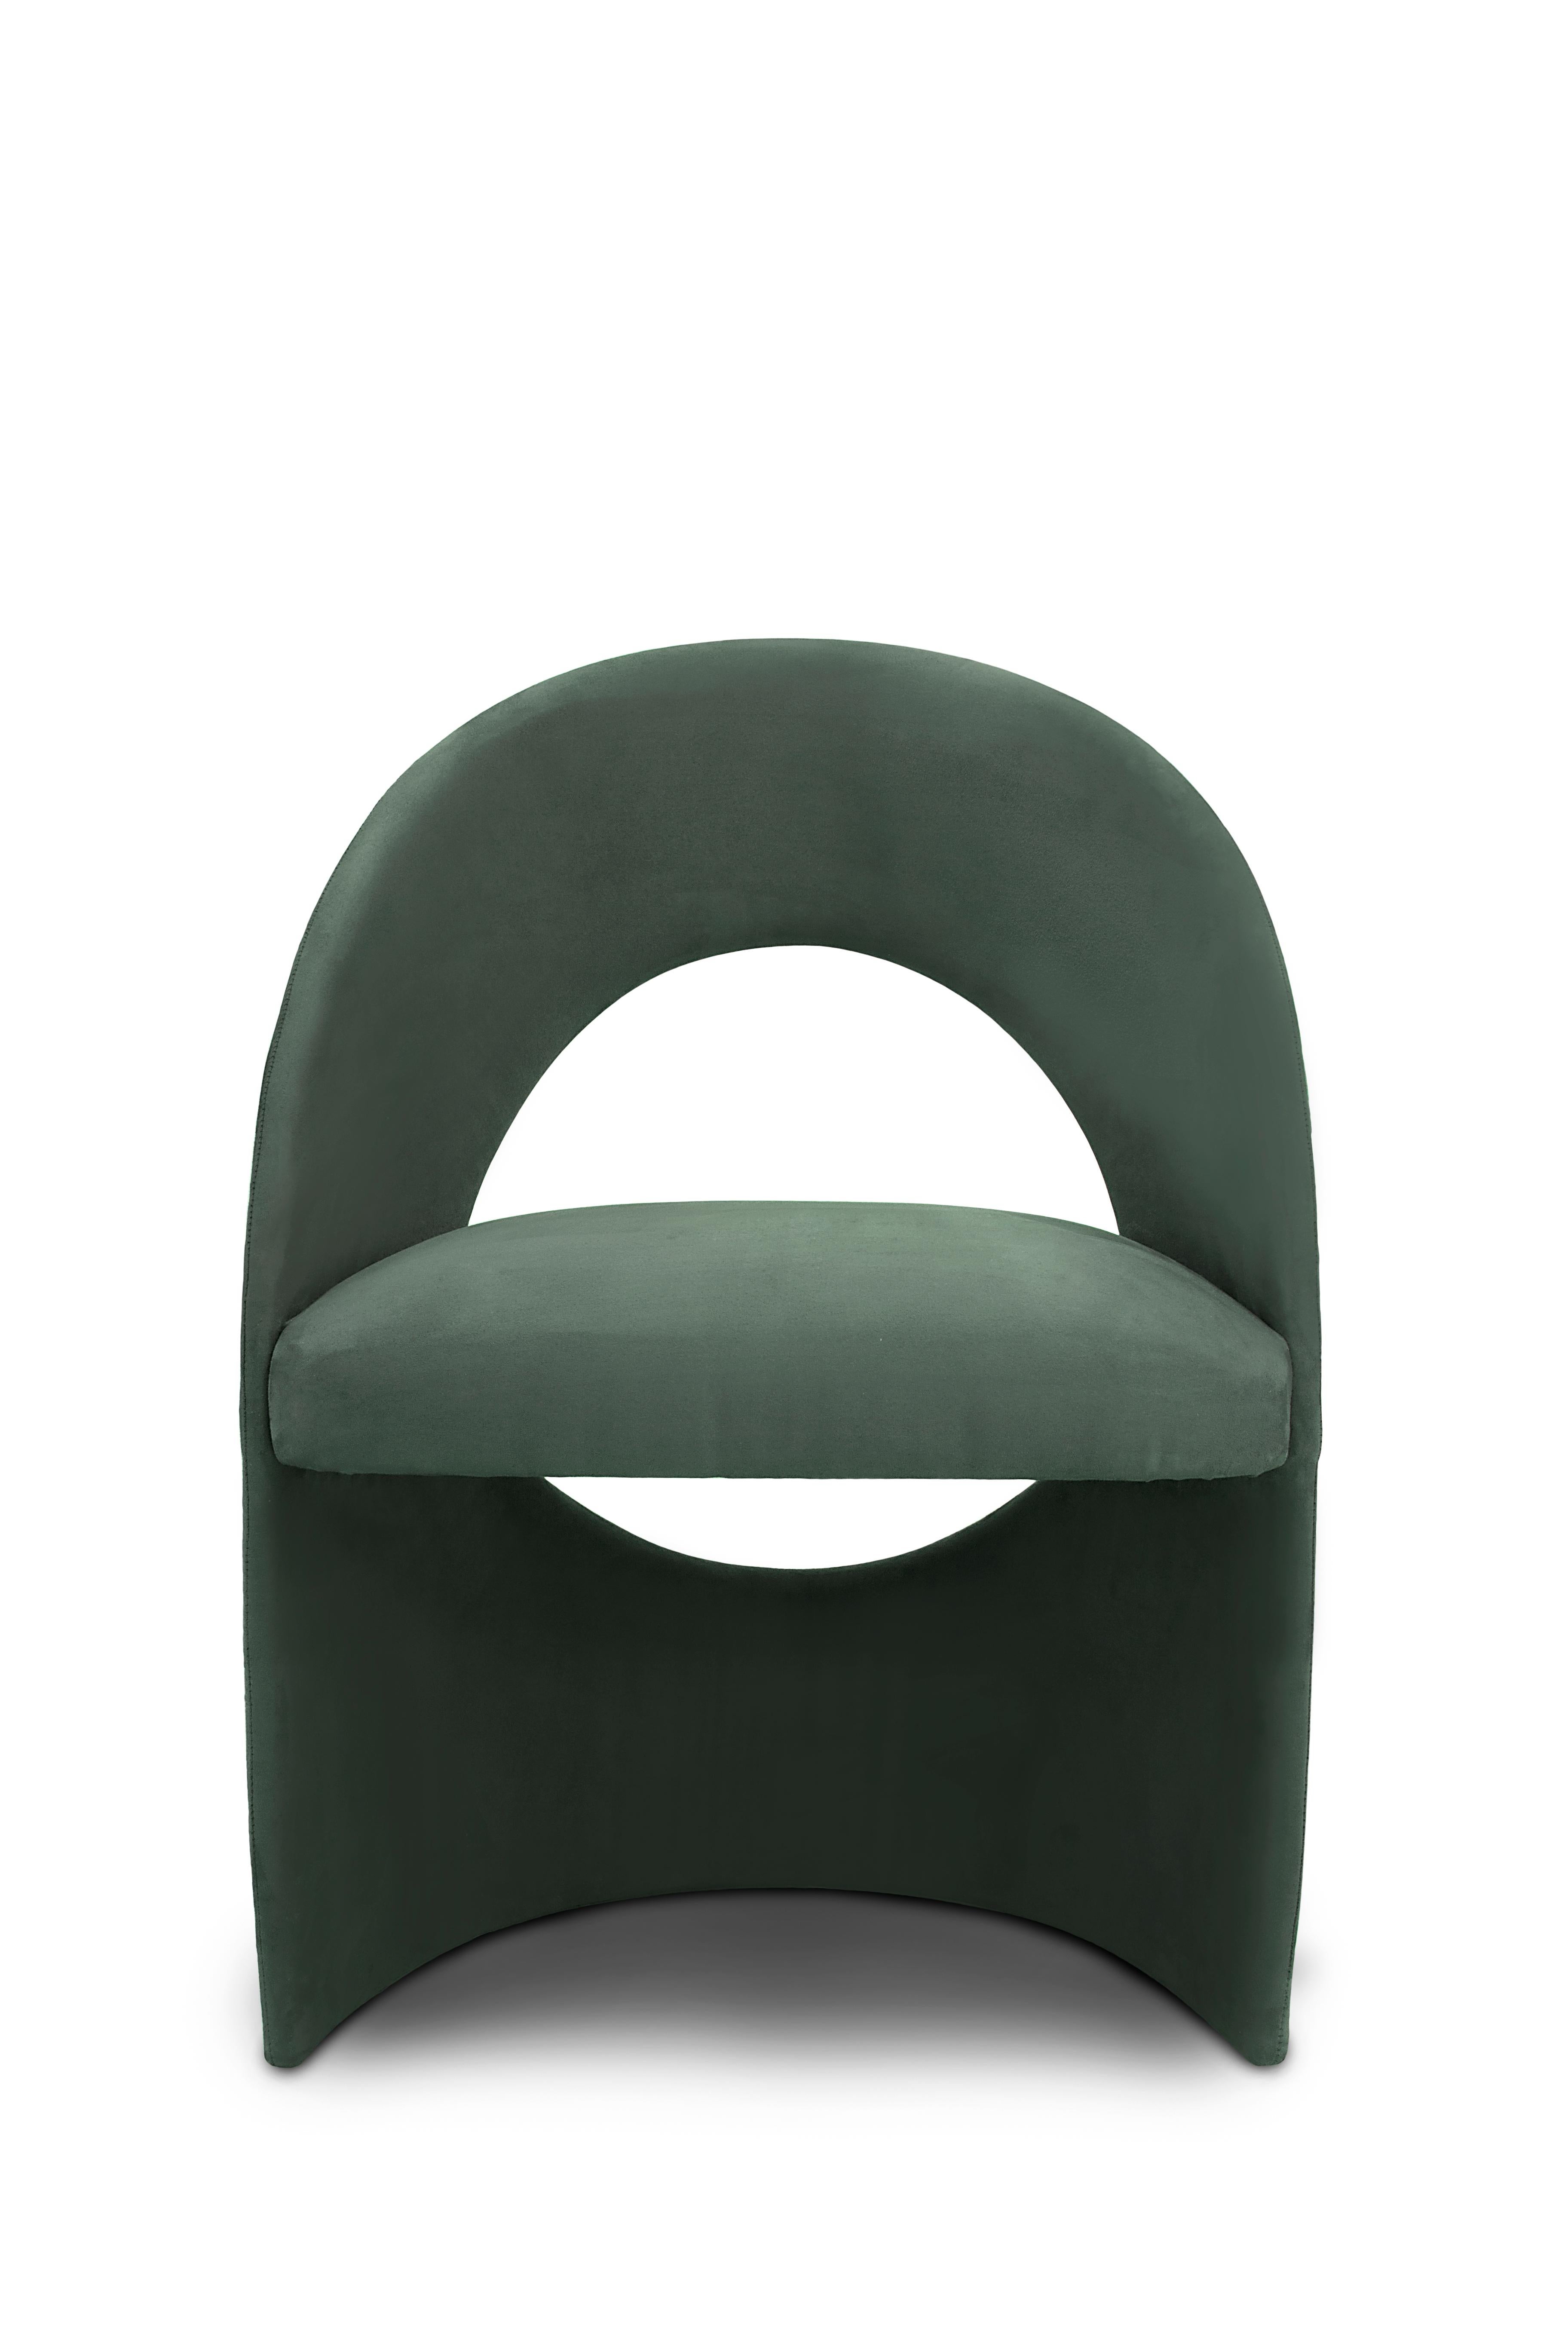 green dining chairs